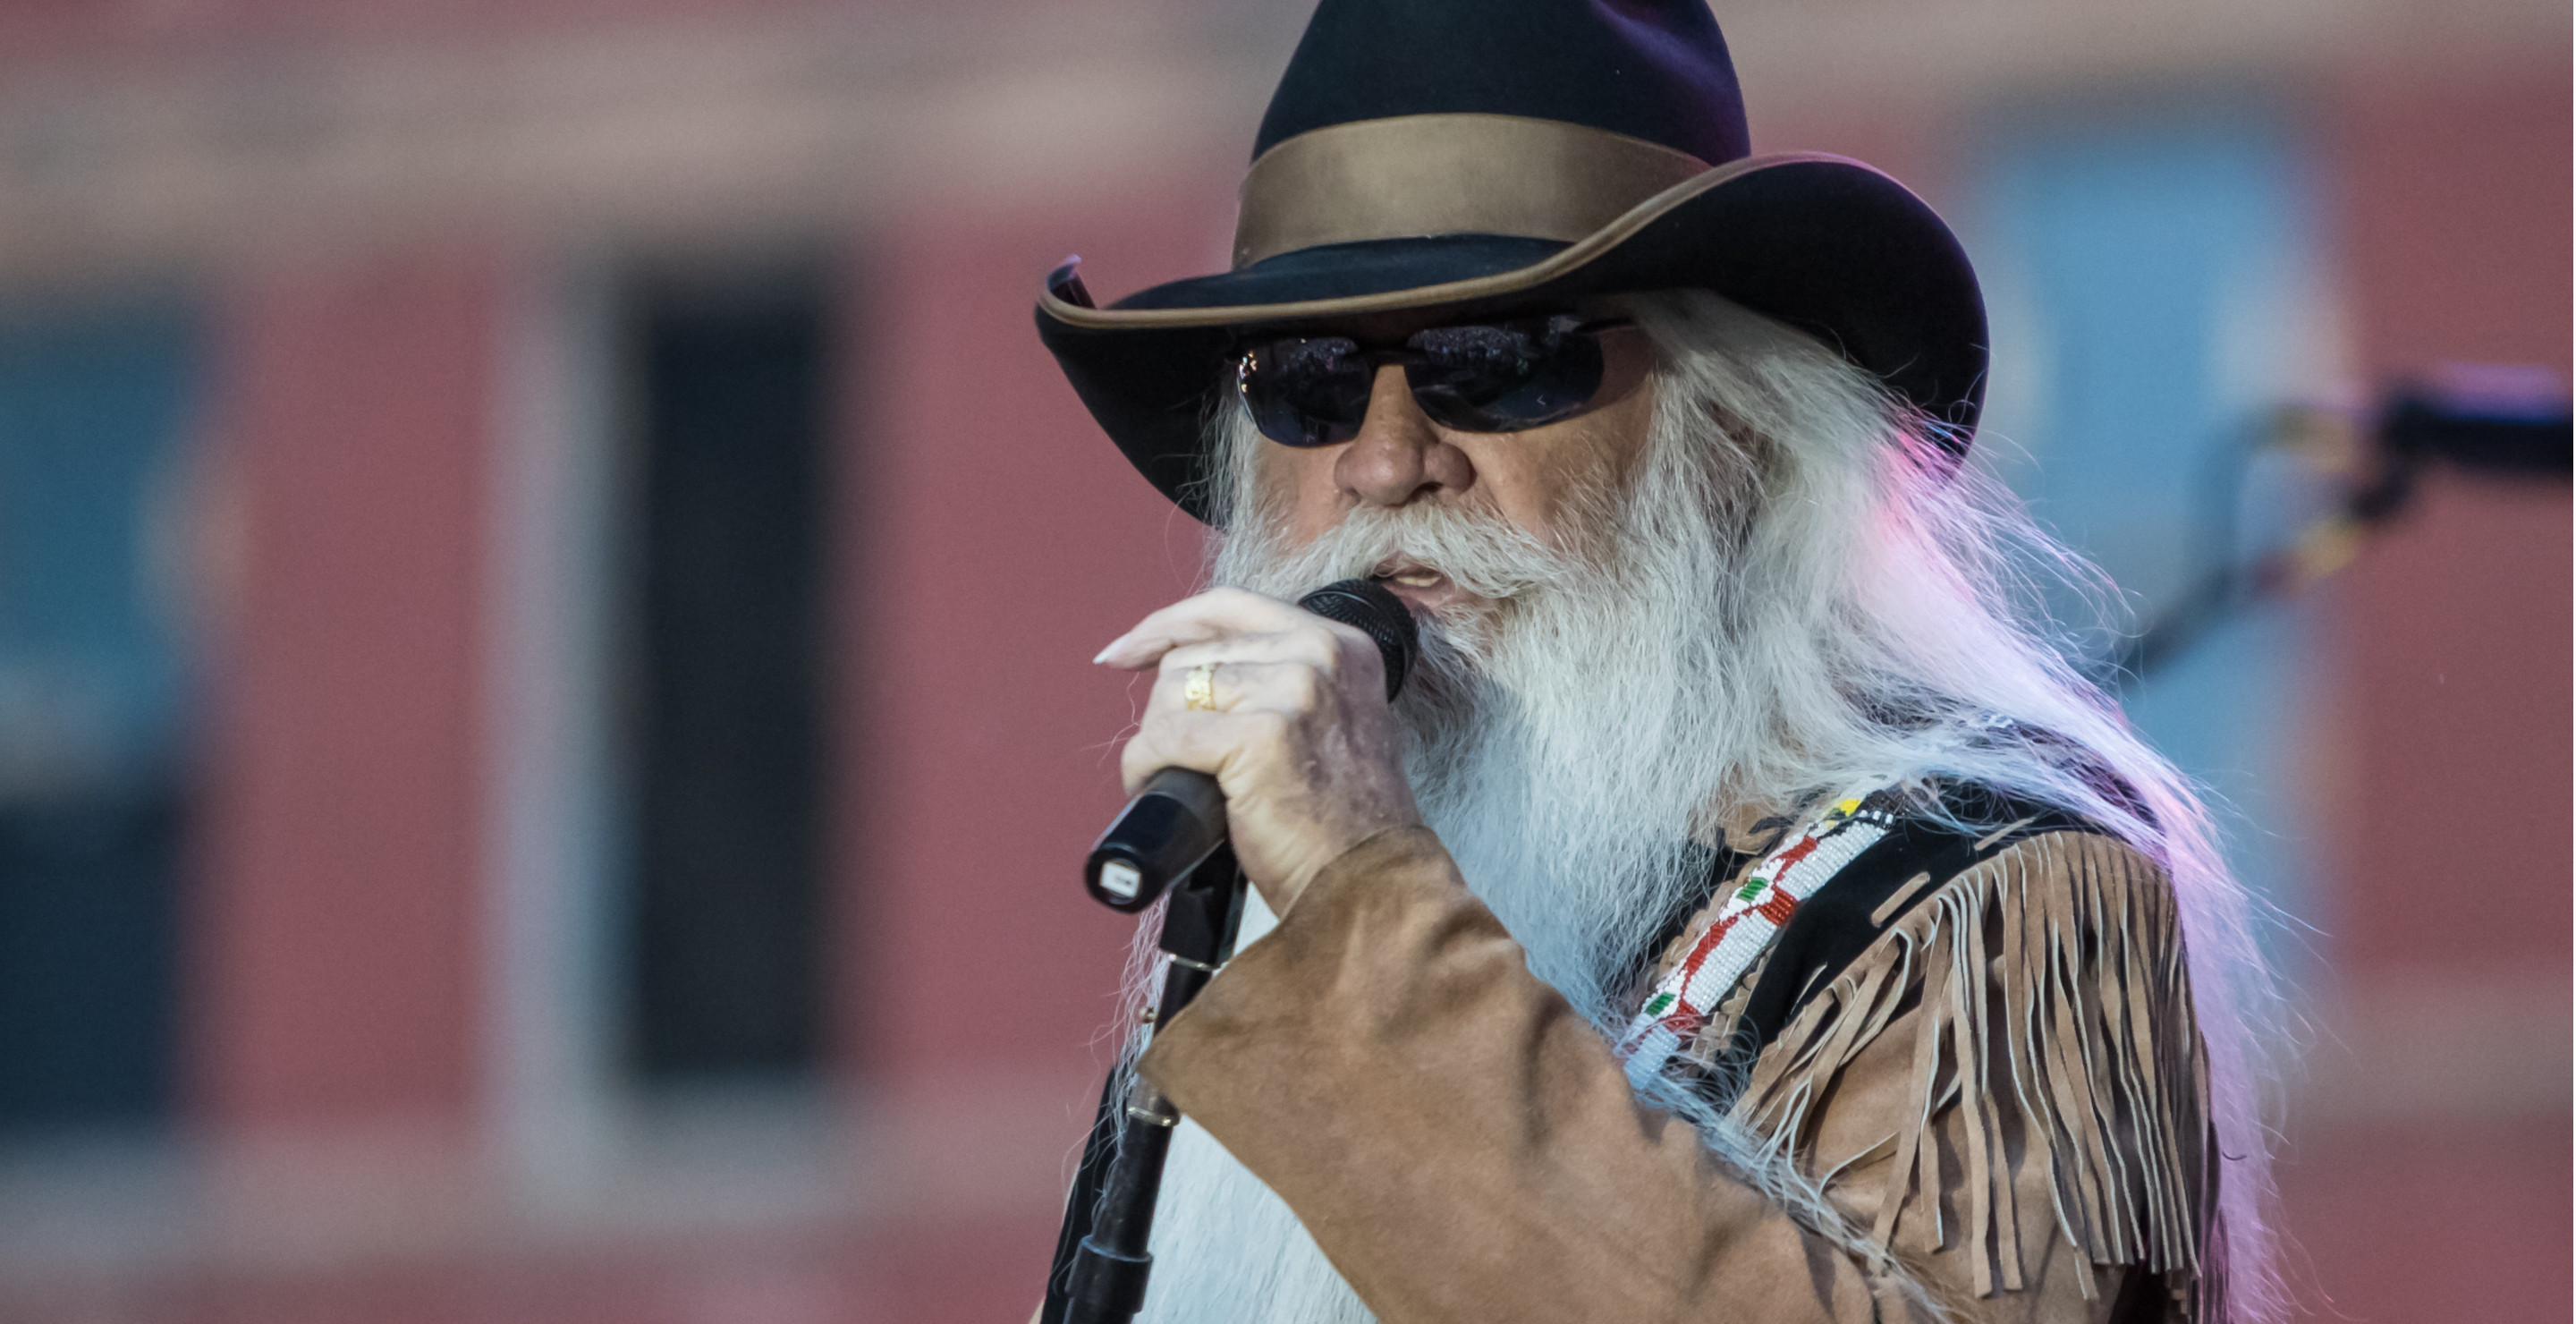 Oak Ridge Boys singer says “the grief continues” after the death of his son and Joe Bonsall